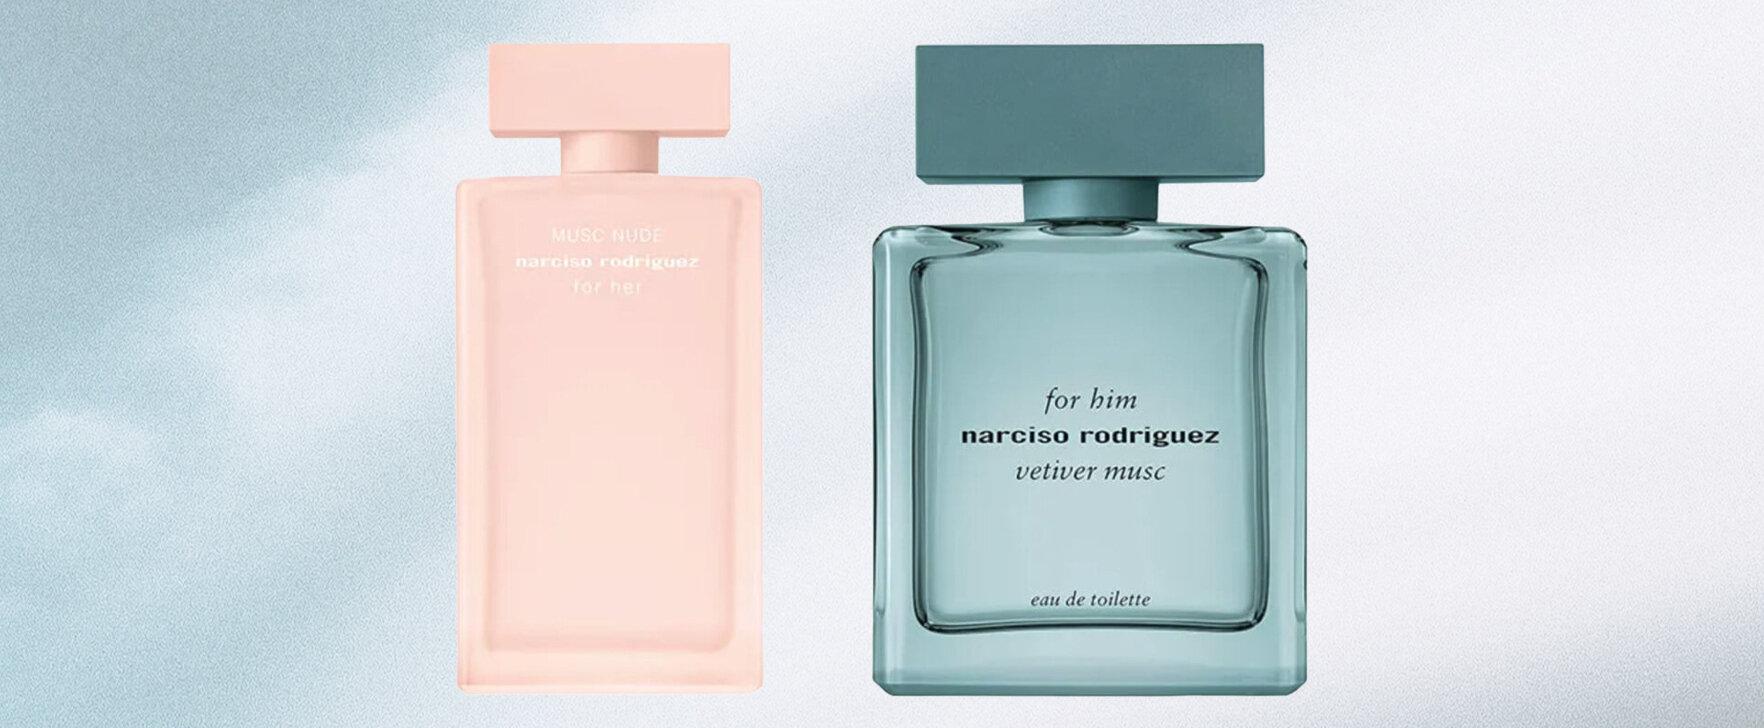 Natural Sensuality: "For Her Musc Nude" and "For Him Vetiver Musc" by Narciso Rodriguez